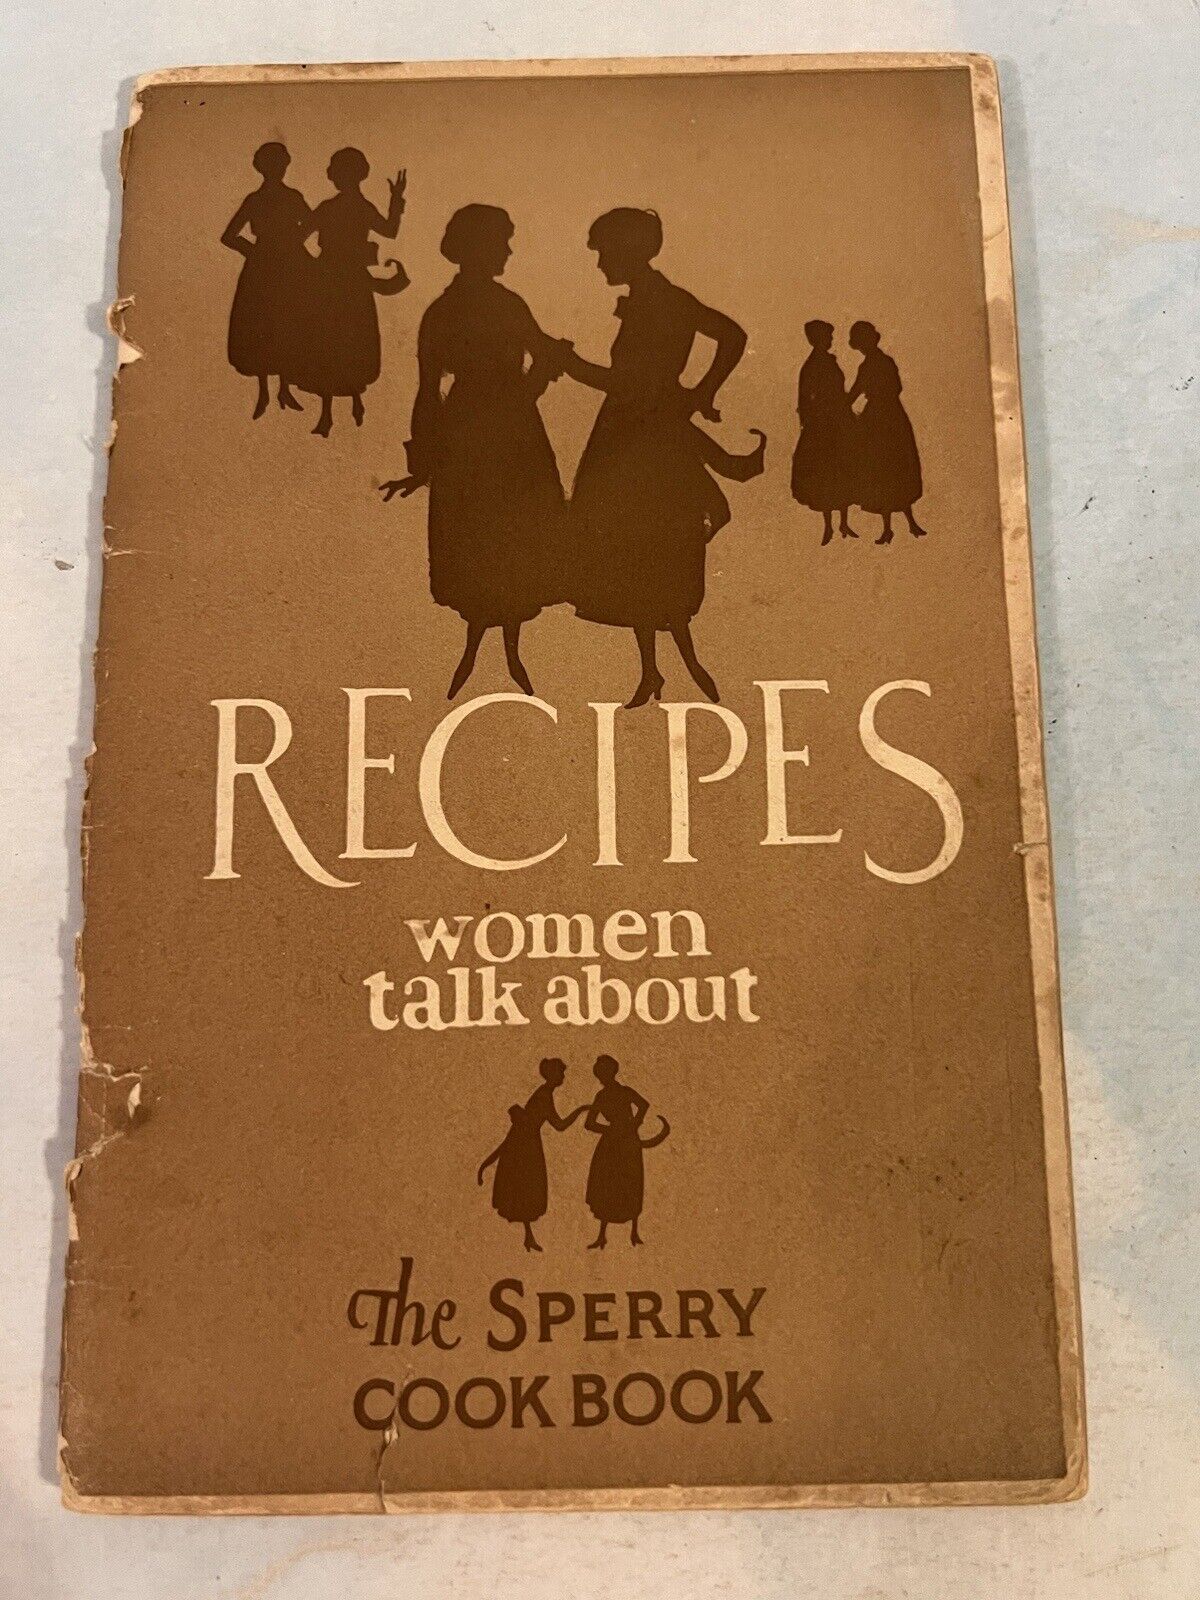 VTG 1940s Recipes Women Talk About: The Sperry Cookbook 